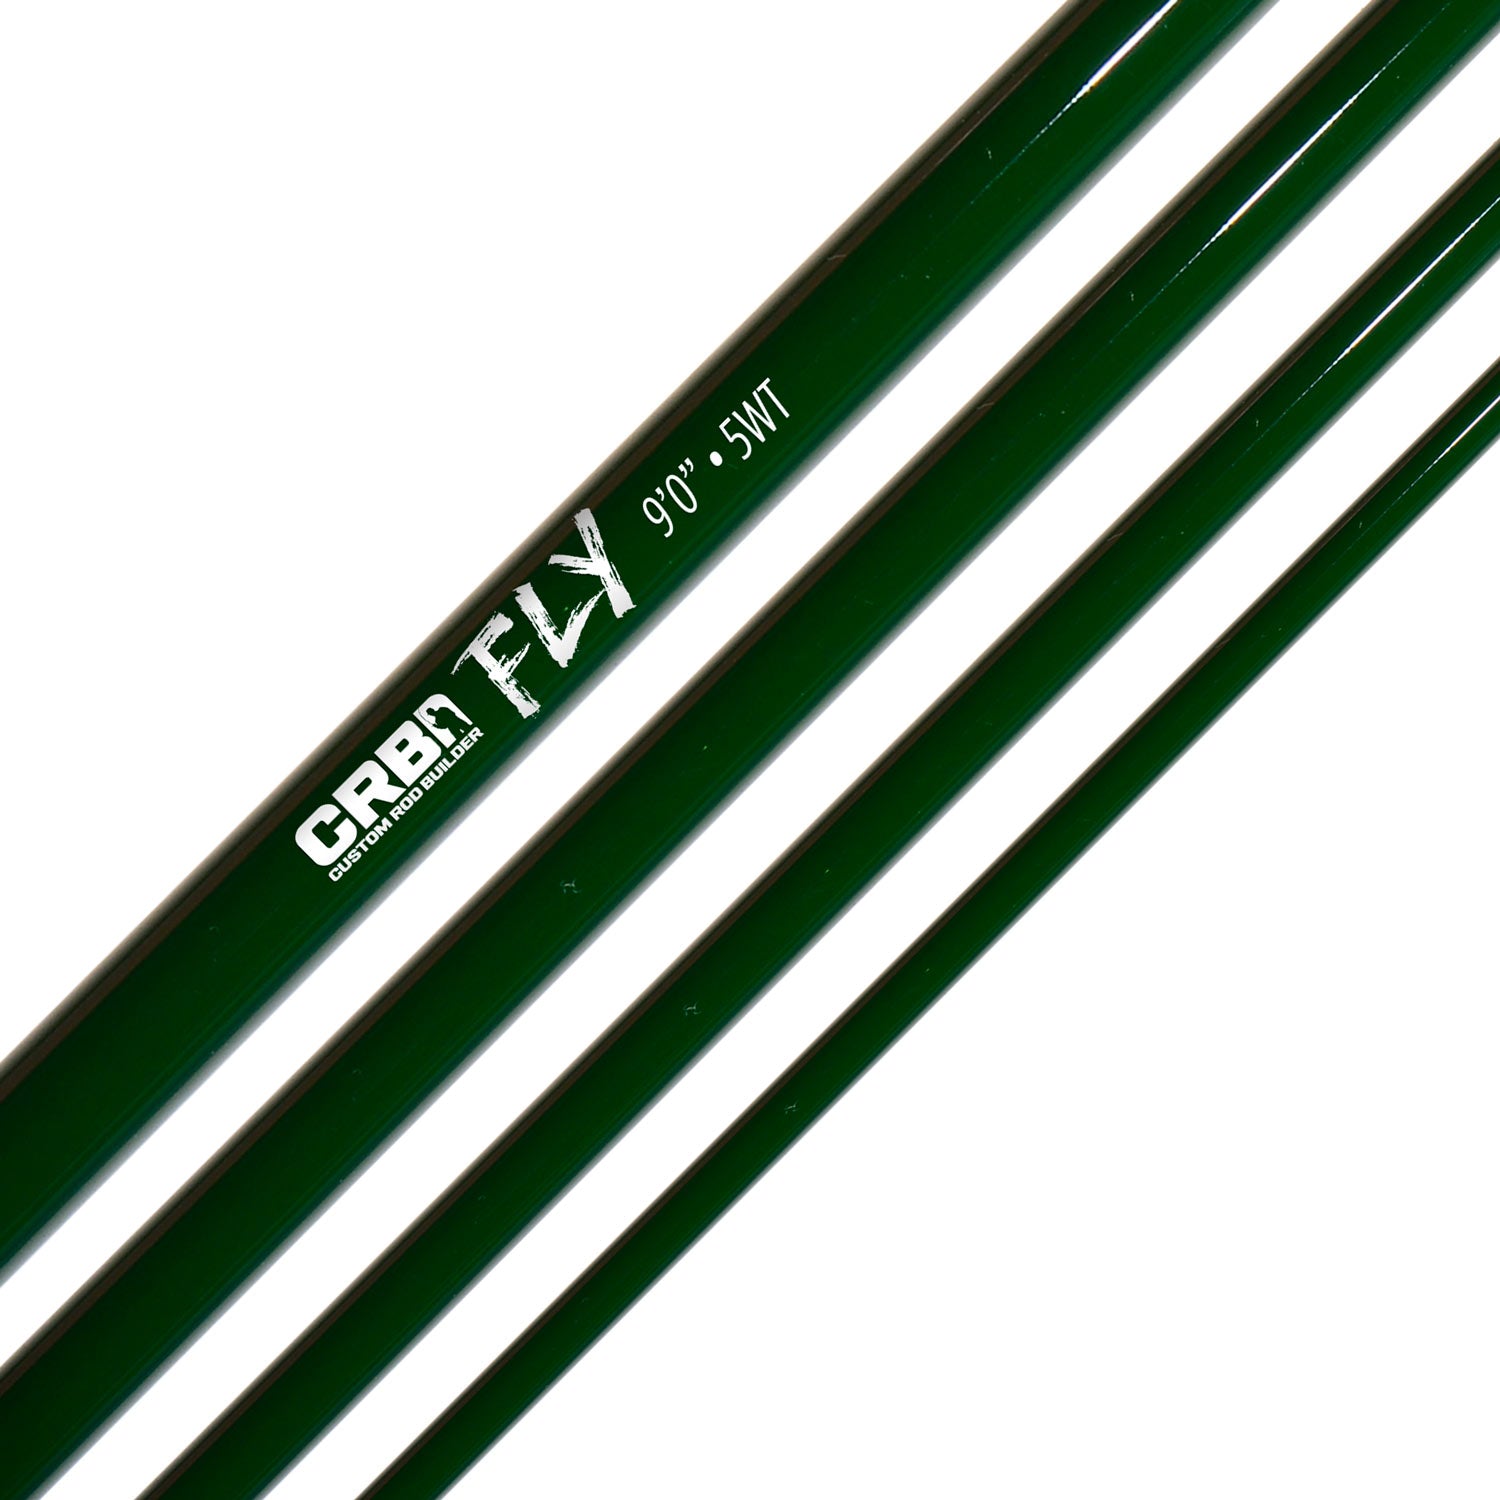 5 Wt Fly Rod for Trout Fishing & Pond Hopping Mud Hole CUSTOM ROD RECIPES  CRB FLY 9'0 5WT on Vimeo